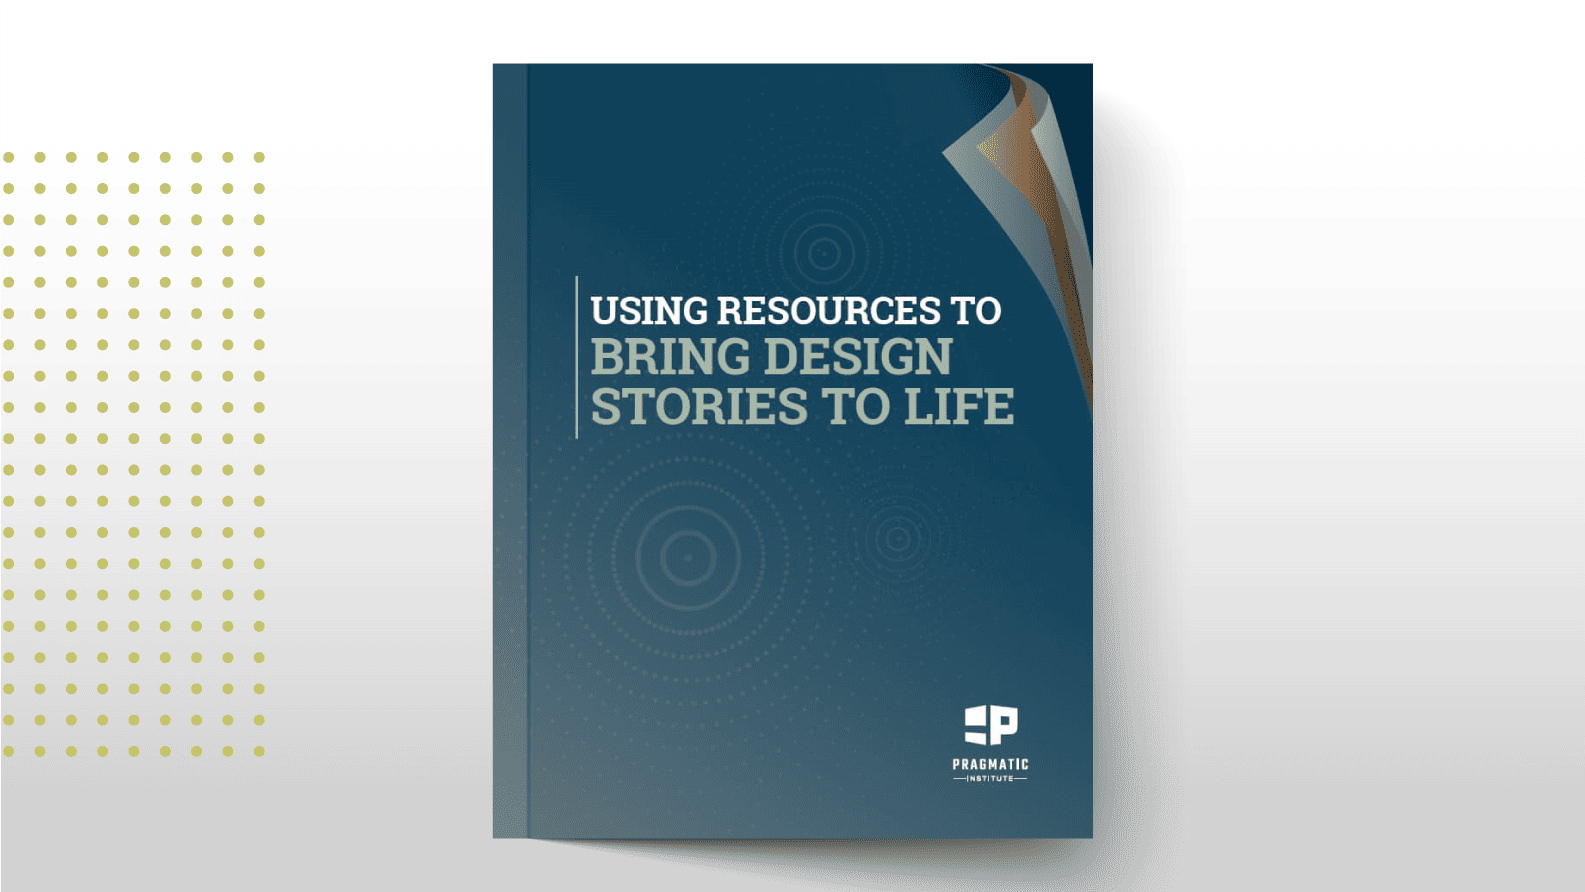 Using Resources to Bring Design Stories to Life